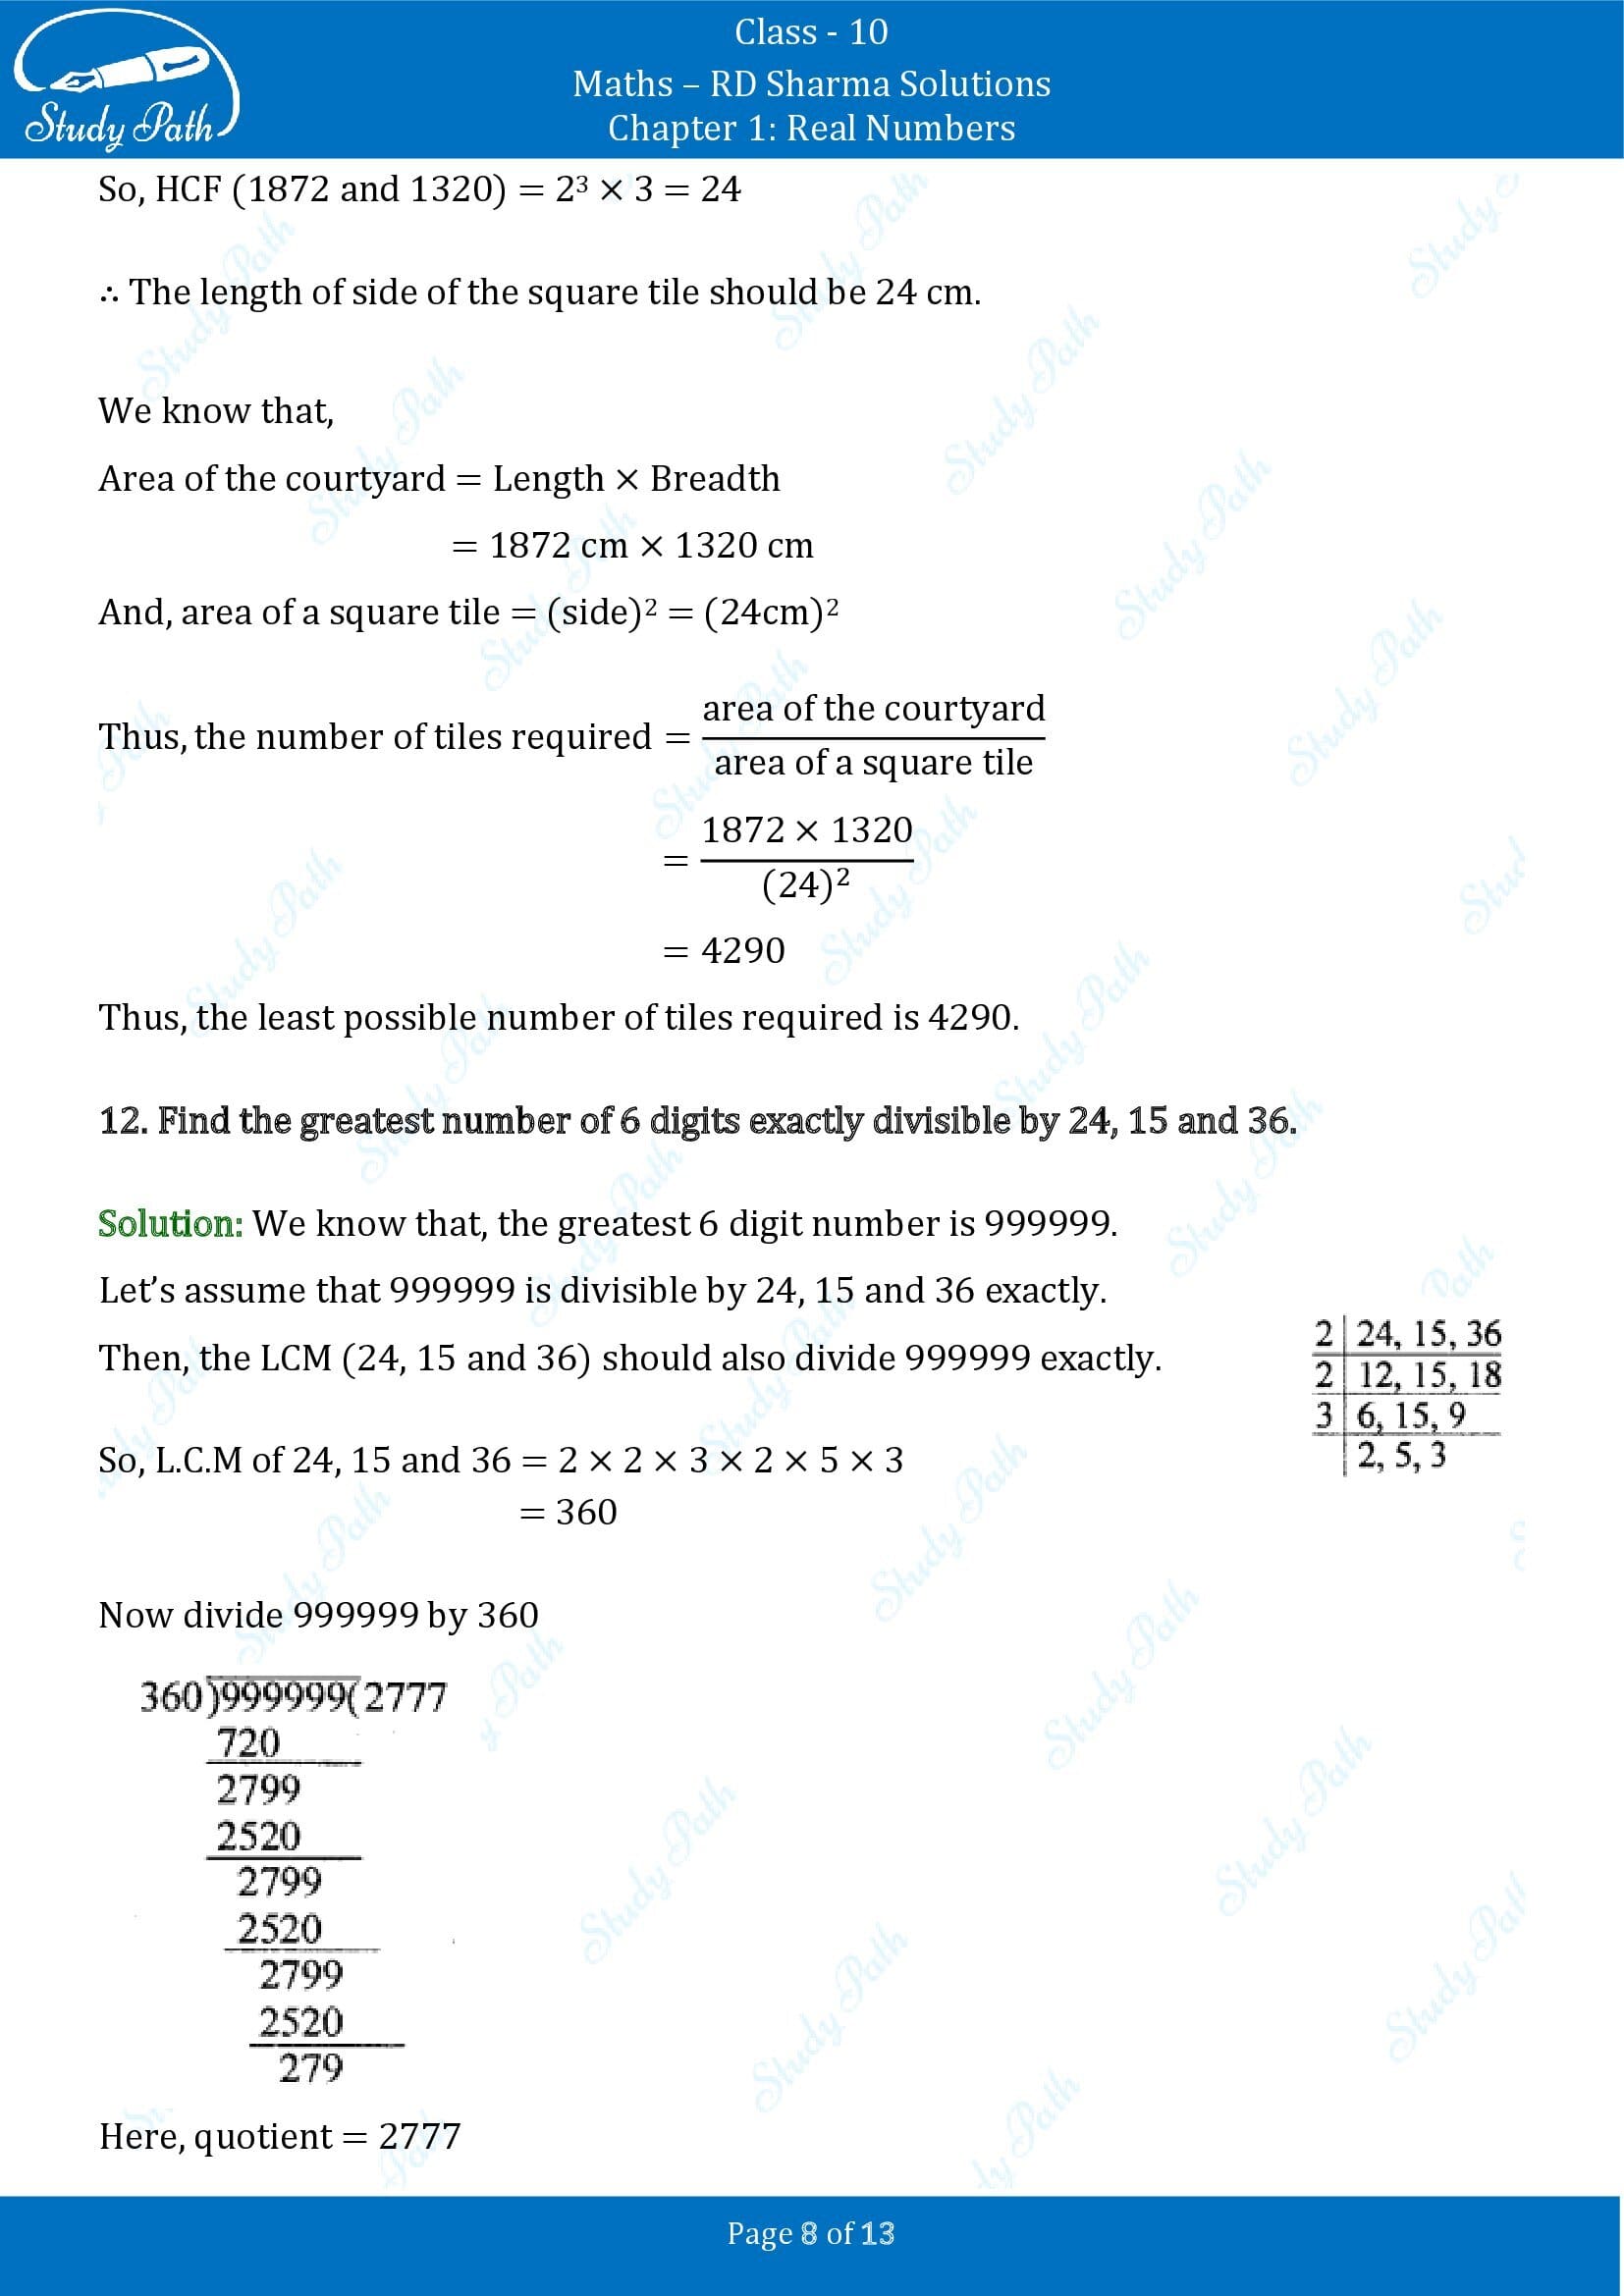 RD Sharma Solutions Class 10 Chapter 1 Real Numbers Exercise 1.4 00008